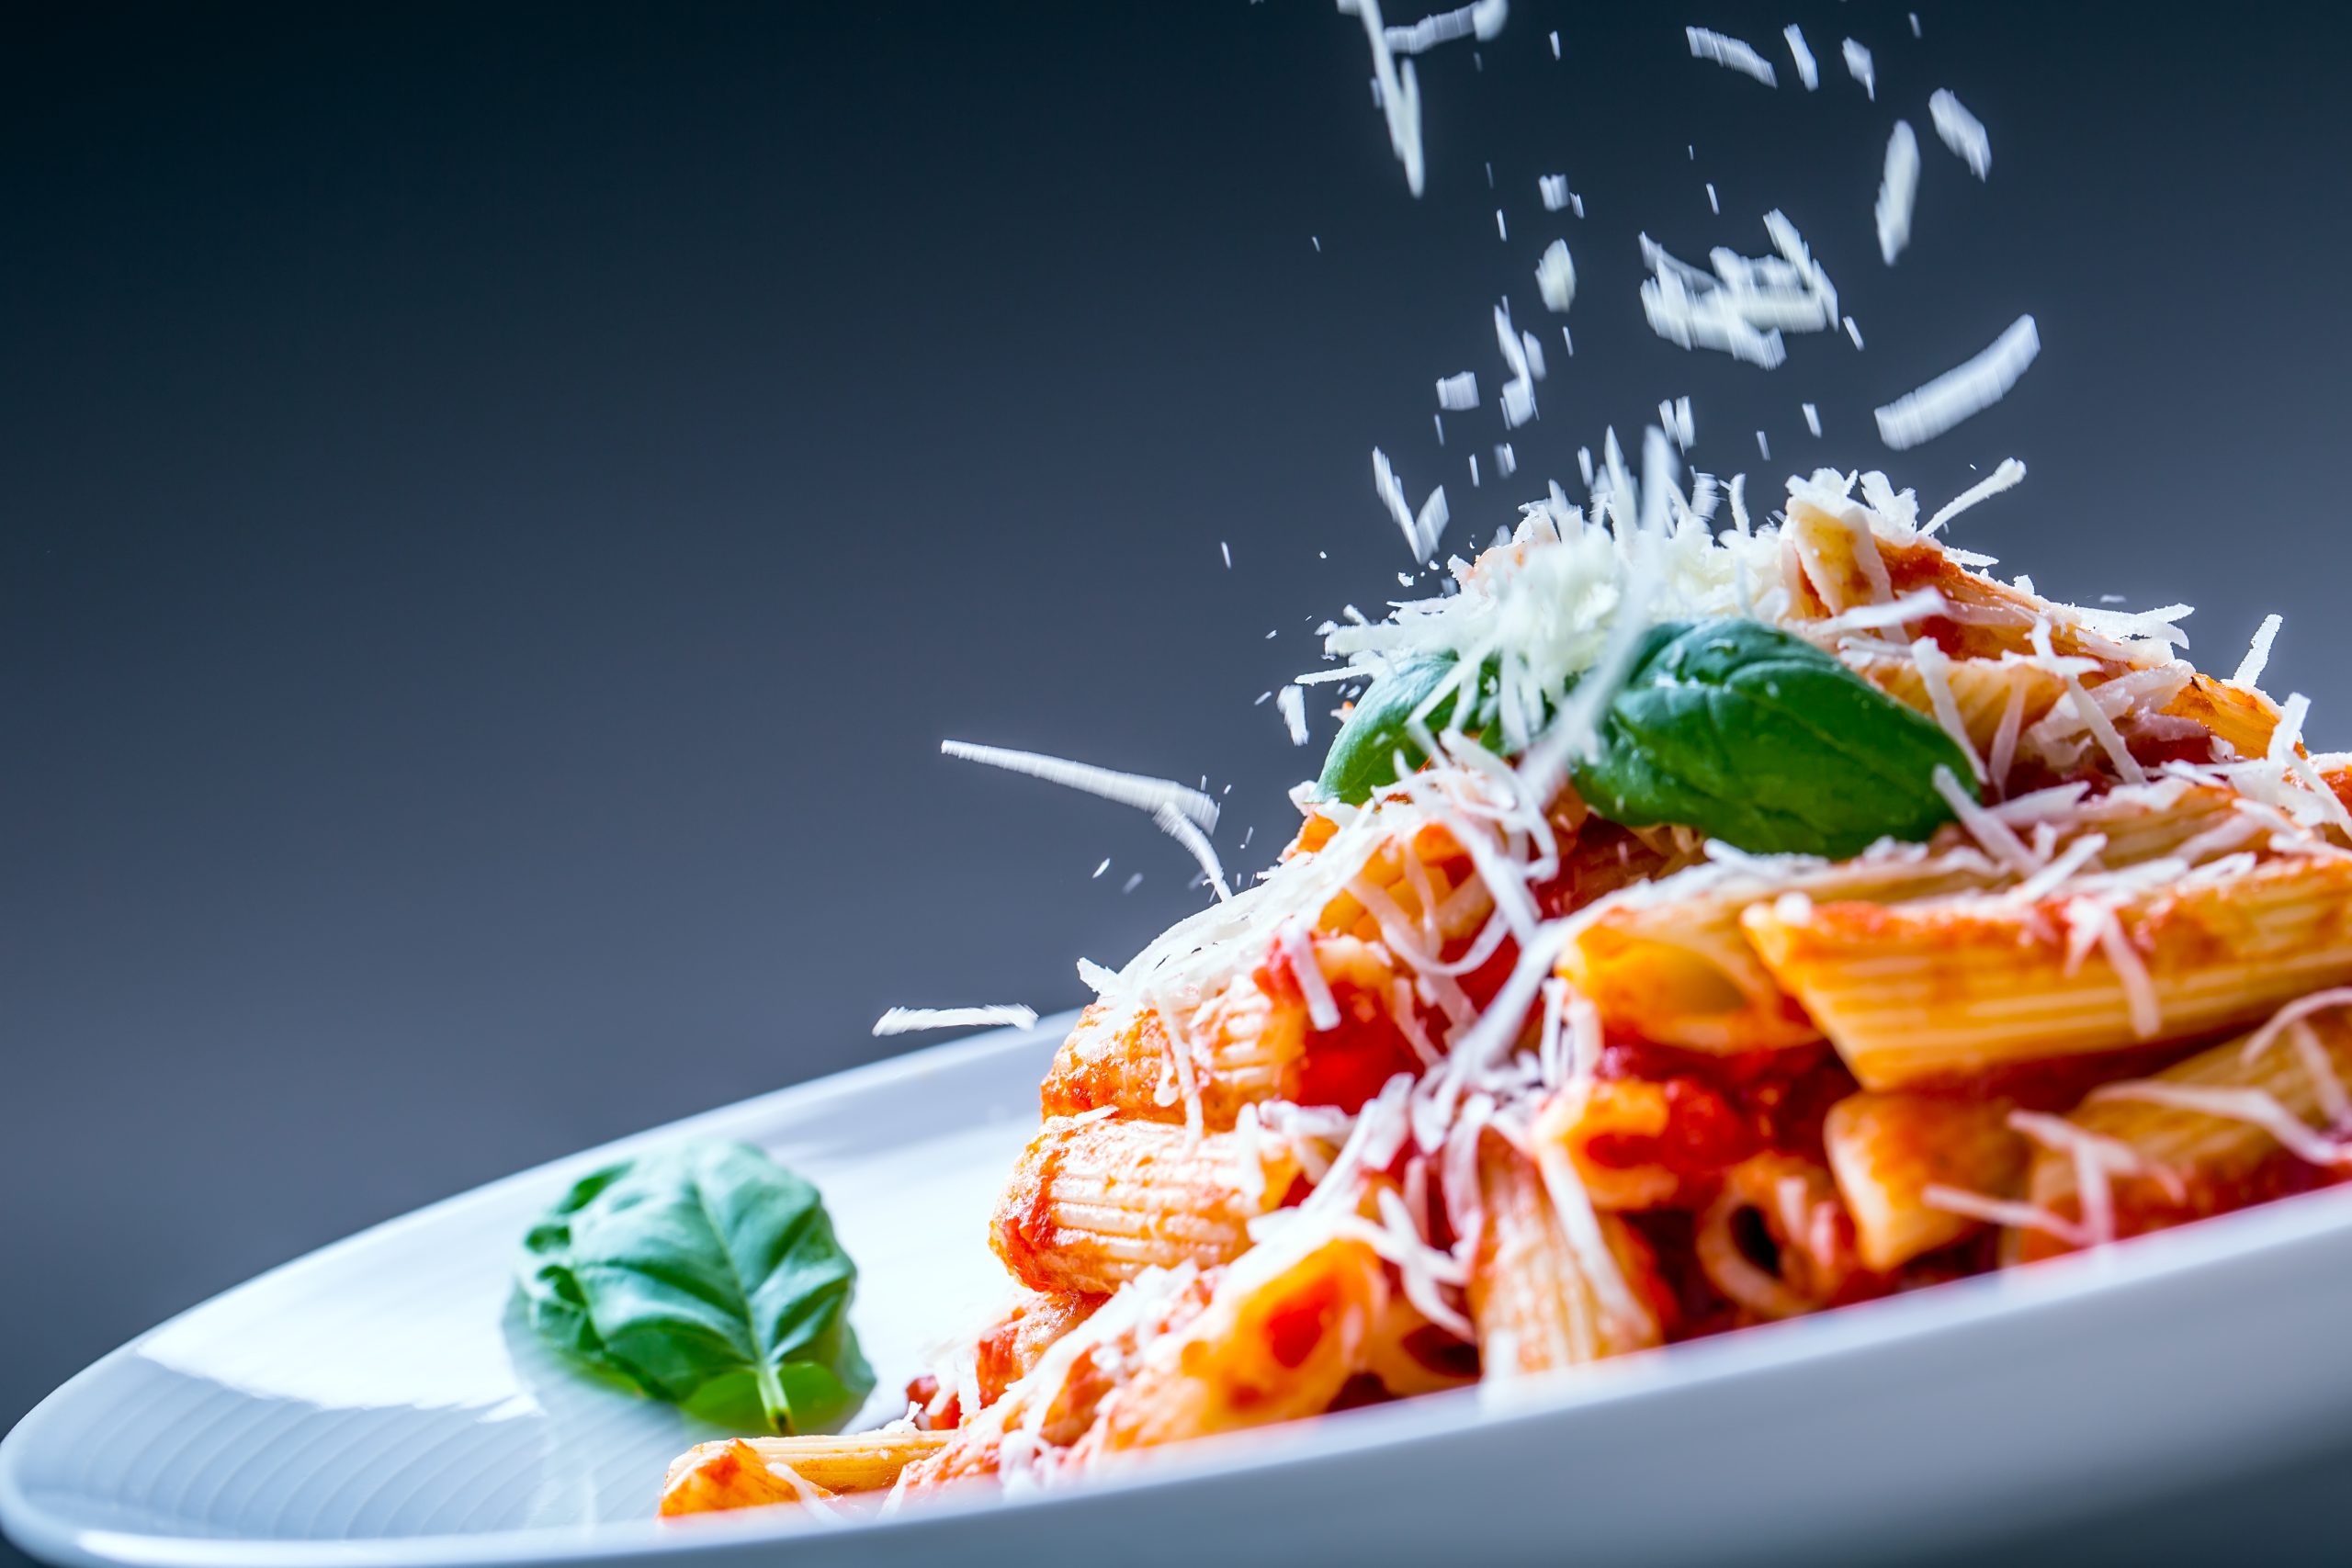 Pasta Penne With Tomato Bolognese Sauce, Parmesan Cheese And Basil.